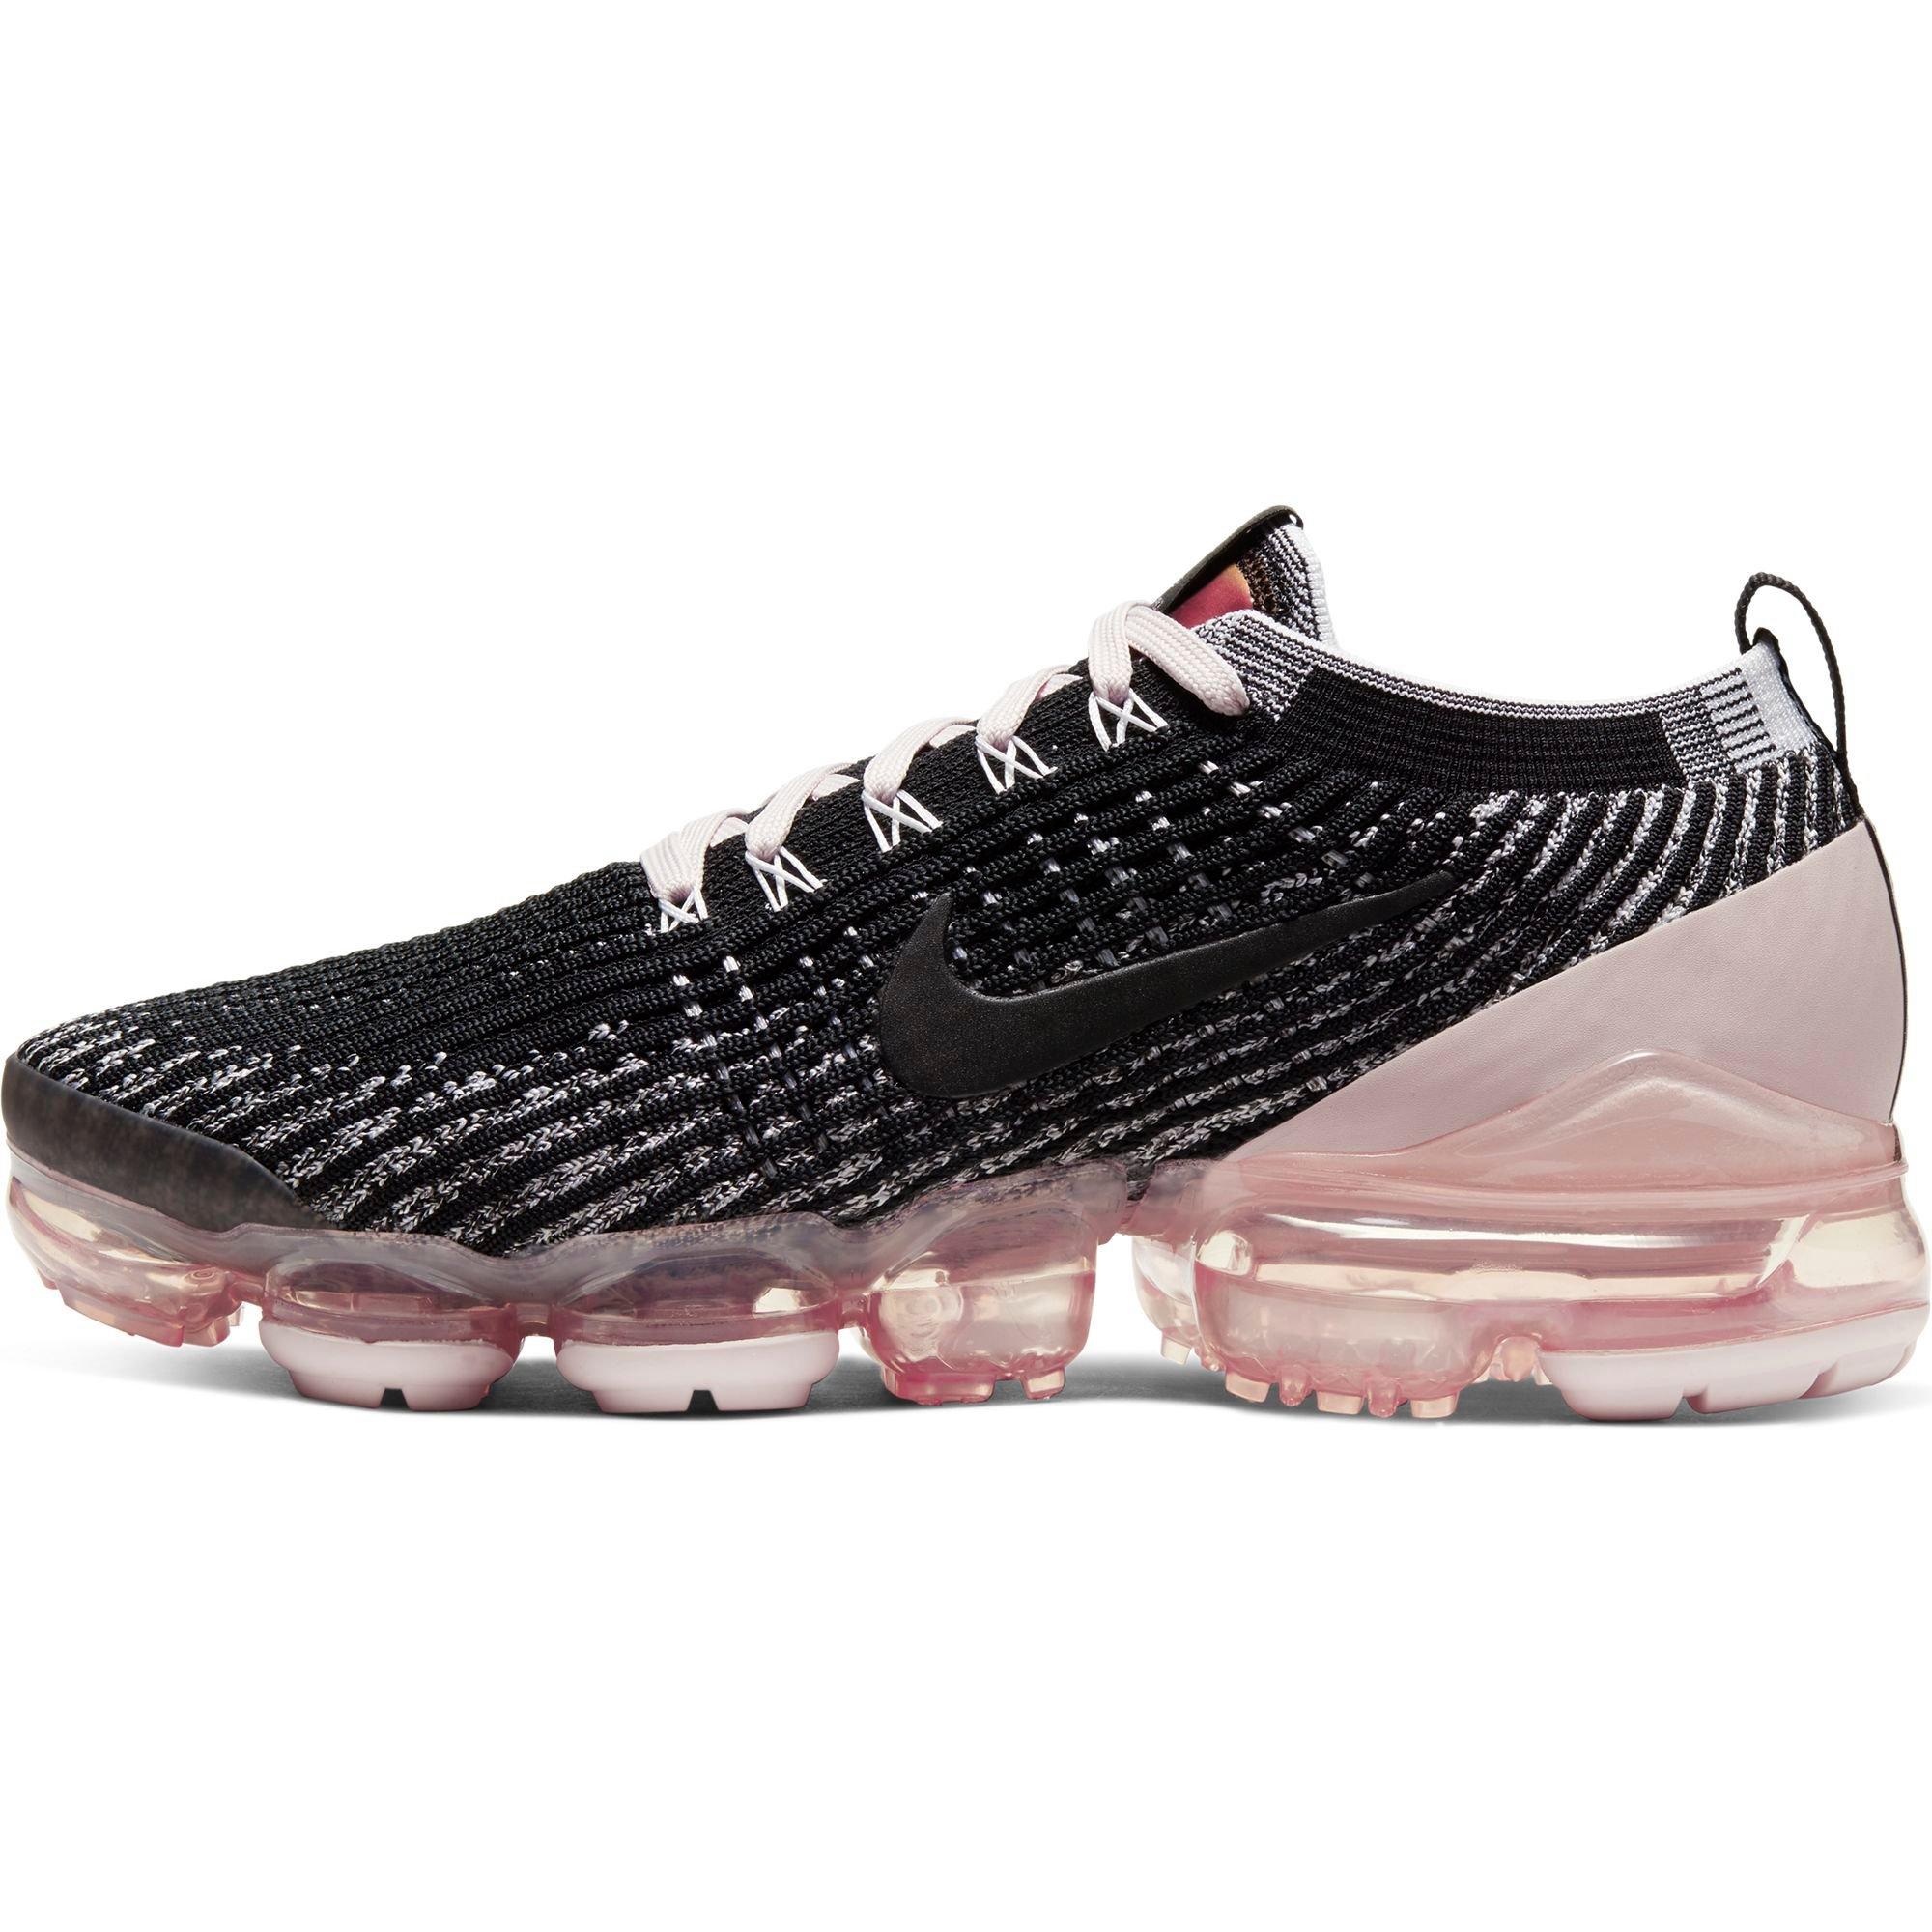 black white and pink vapormax